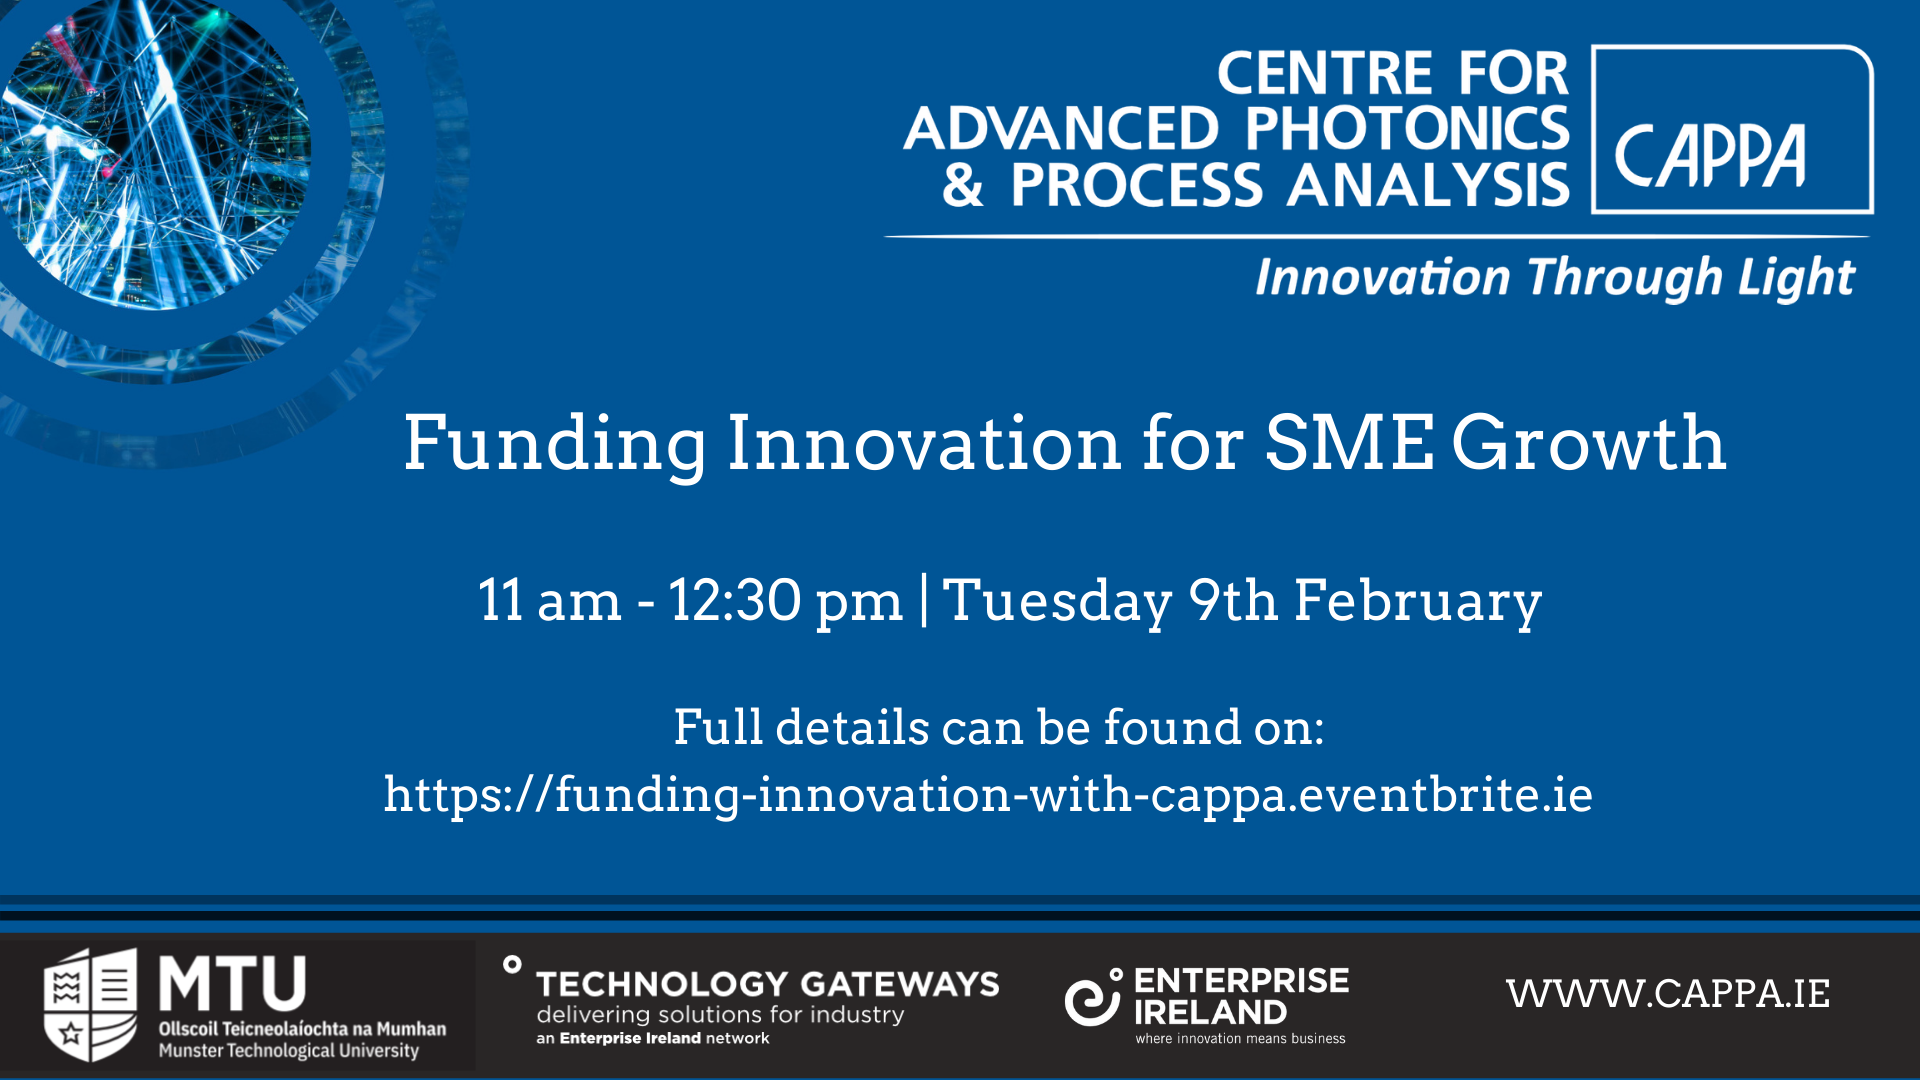 CAPPA Funding Innovation for SME Growth in association with the Hincks Centre - CAPPA